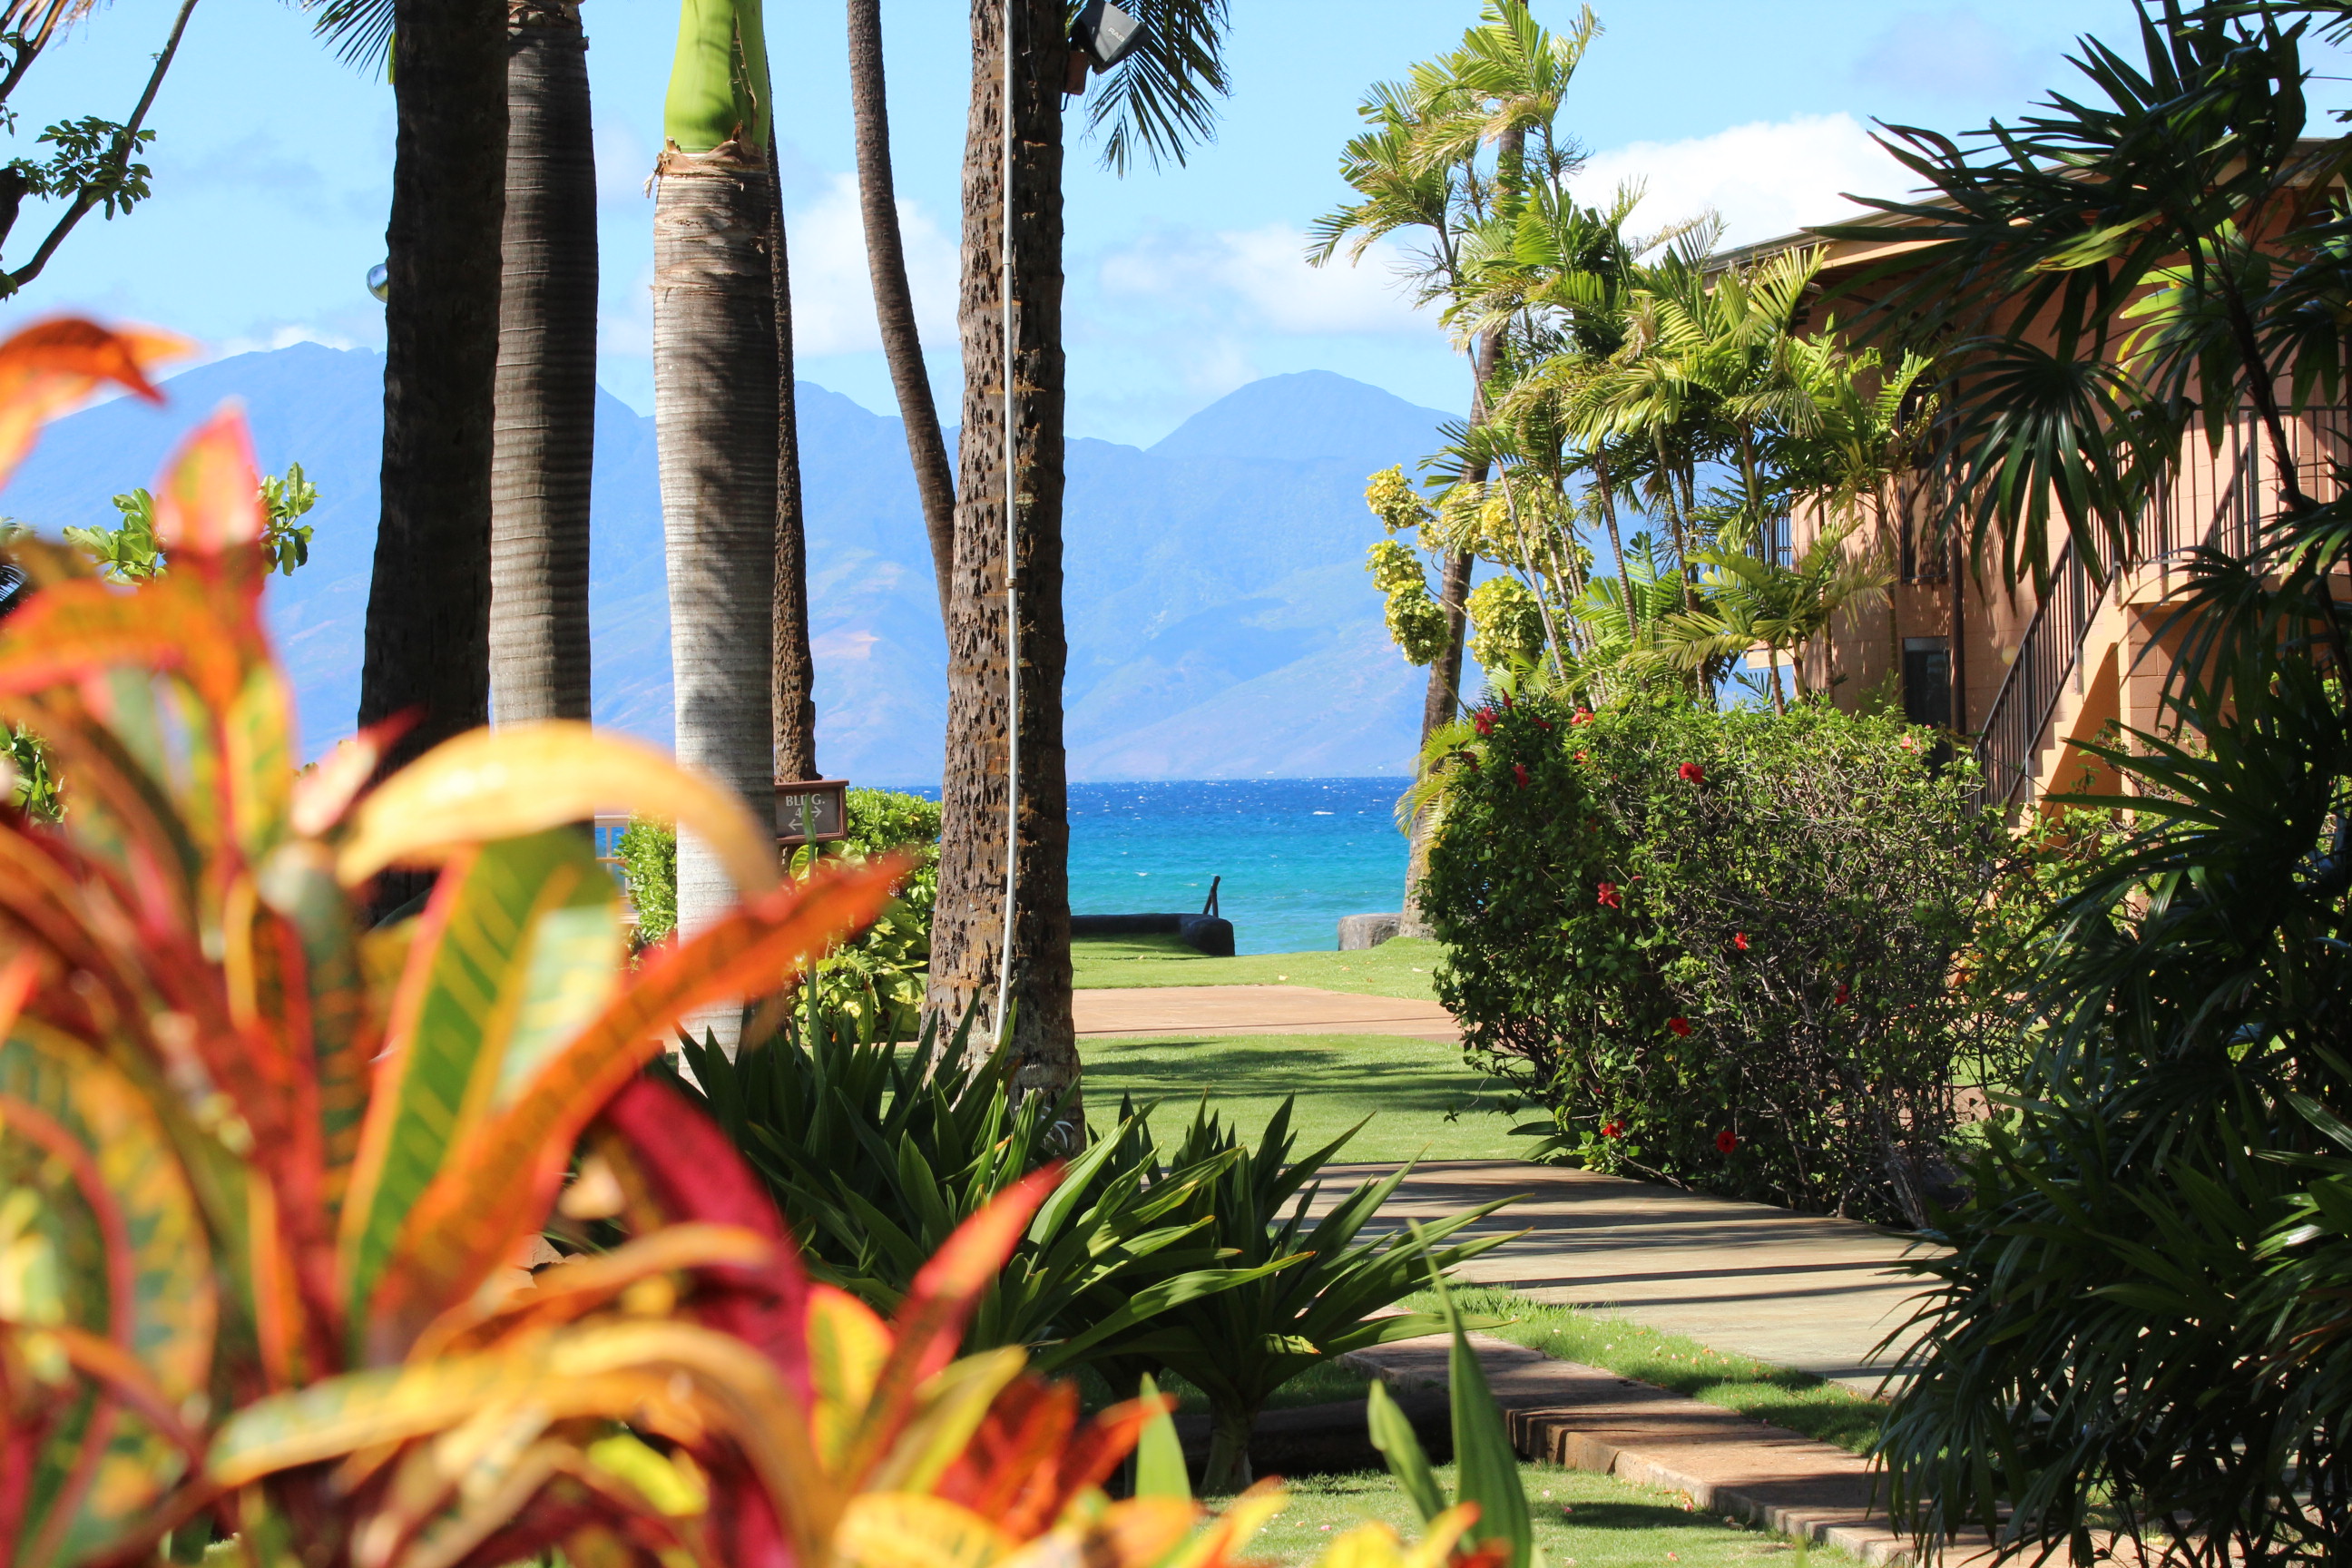 Image of the view from the yard at Maui Sands